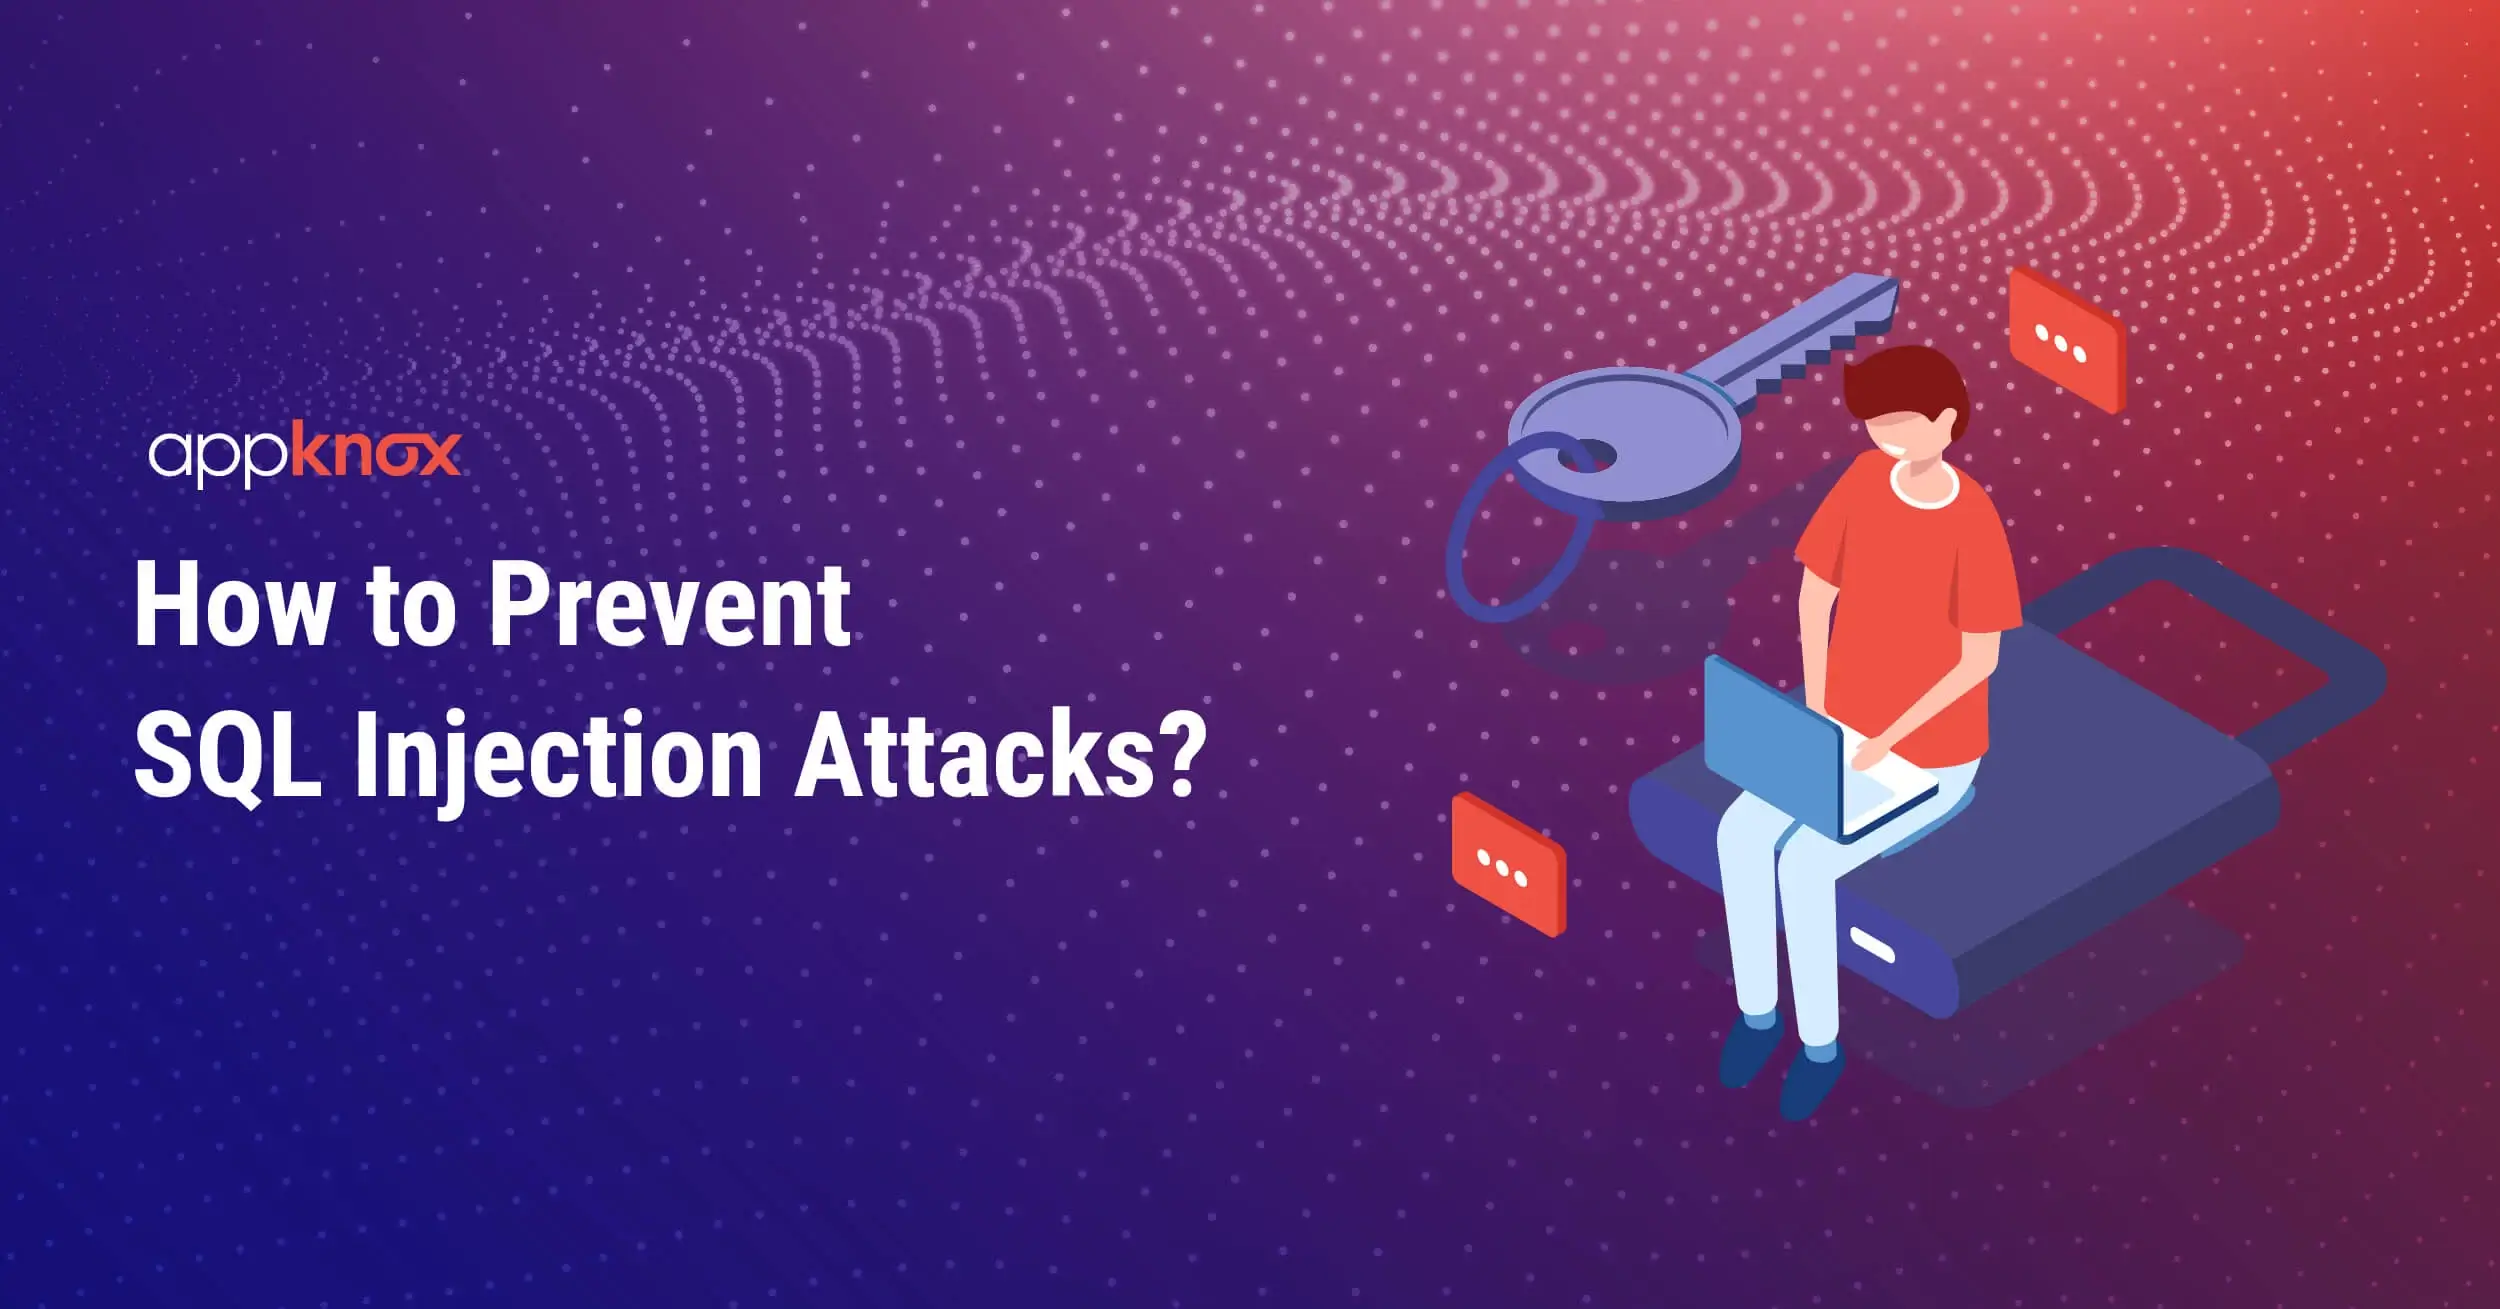 How to Prevent SQL Injection Attacks